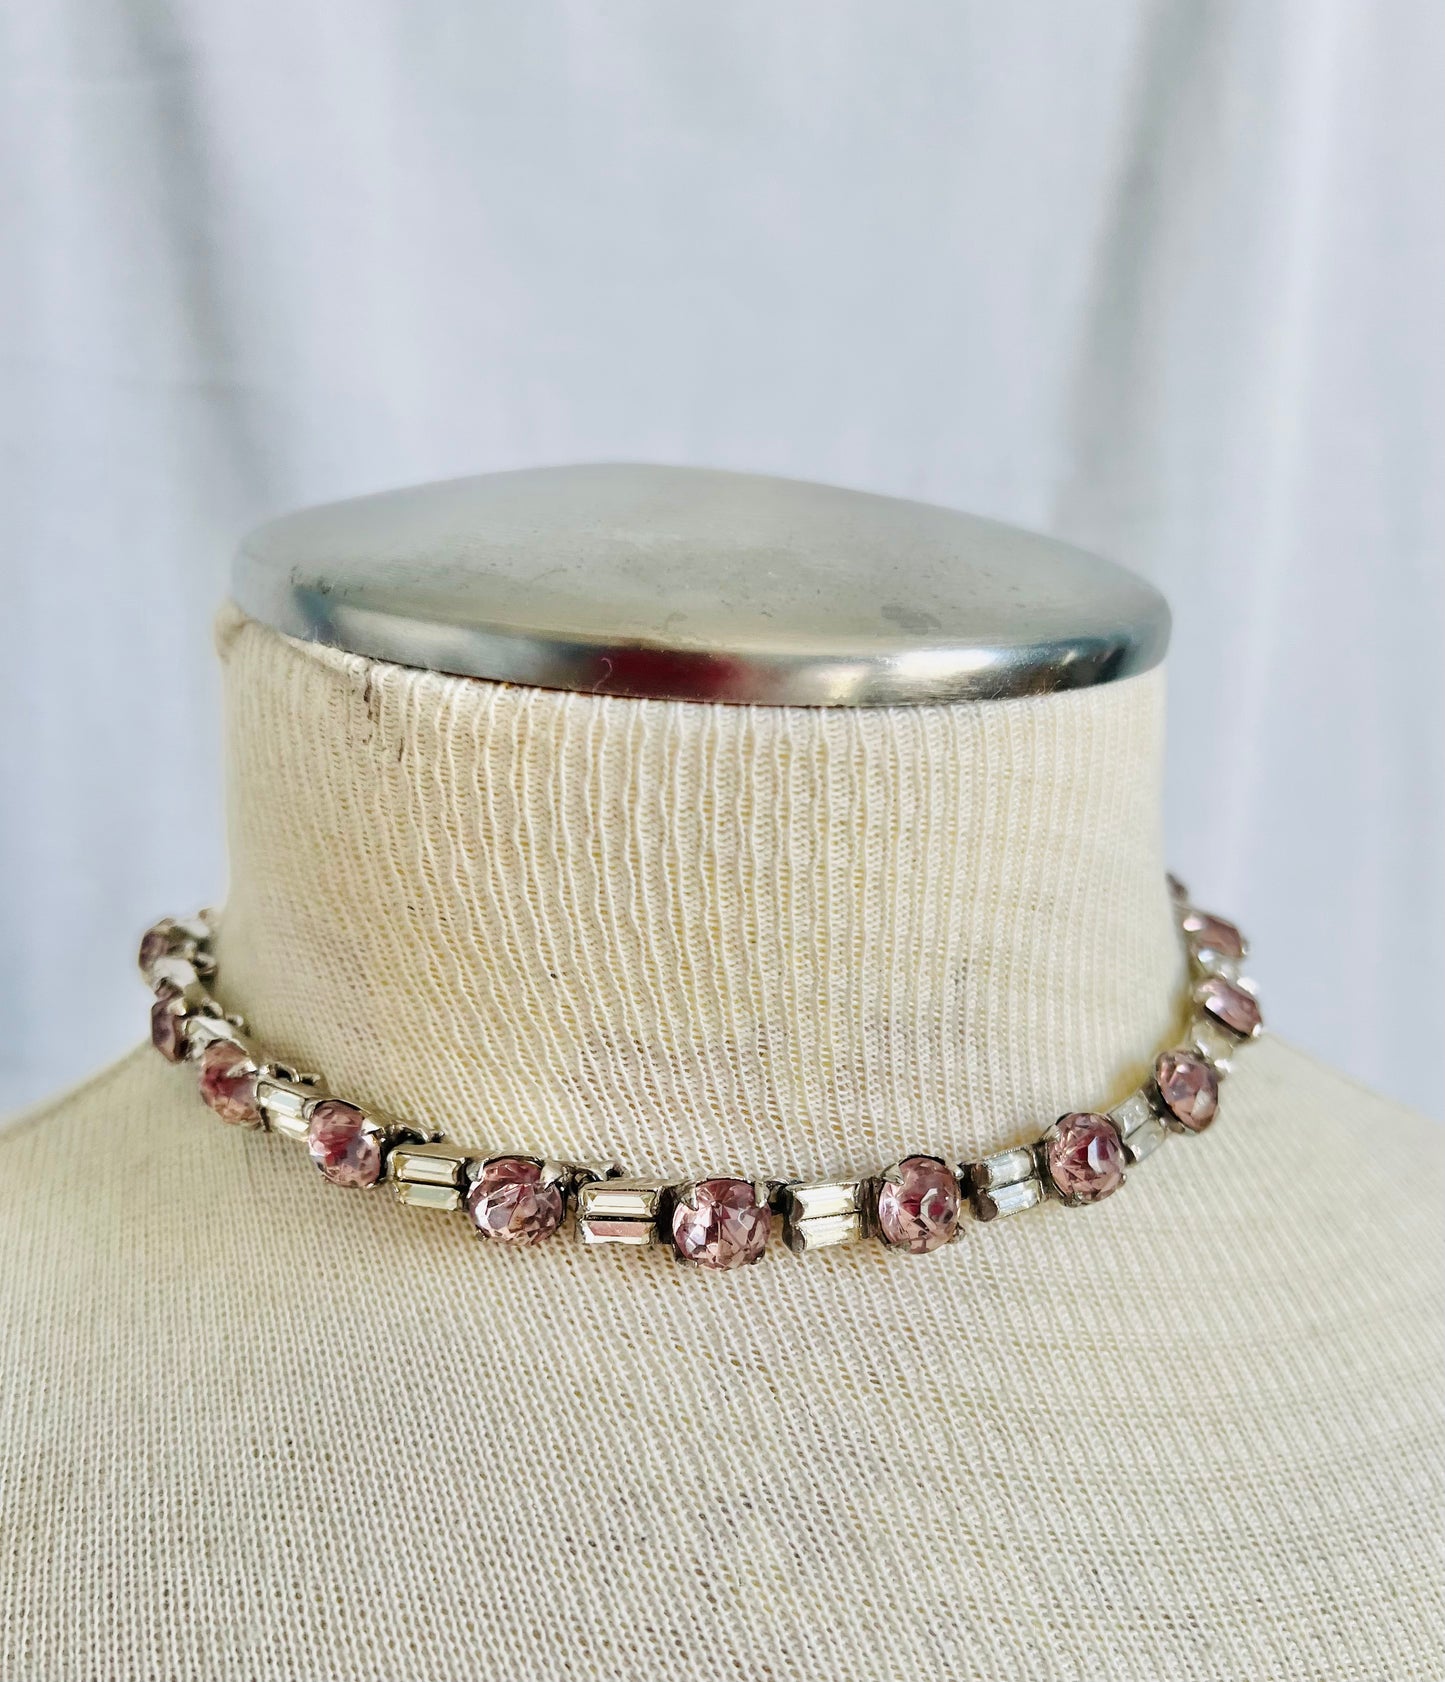 Vintage 1930s Lavender and Clear Glass Choker Necklace